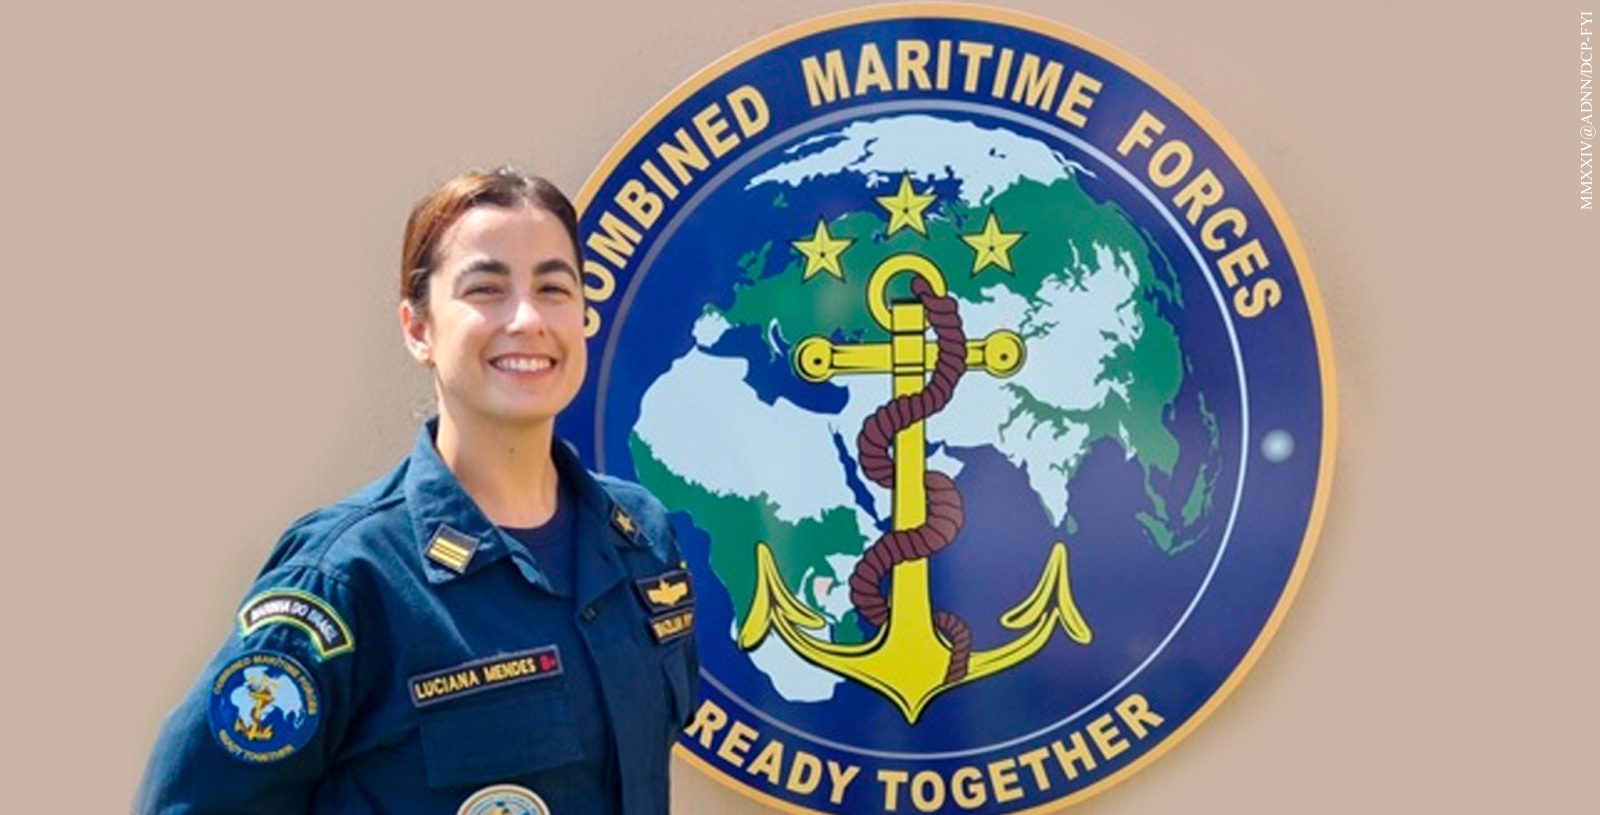 The first Brazilian woman to join the Anti-Piracy Task Force